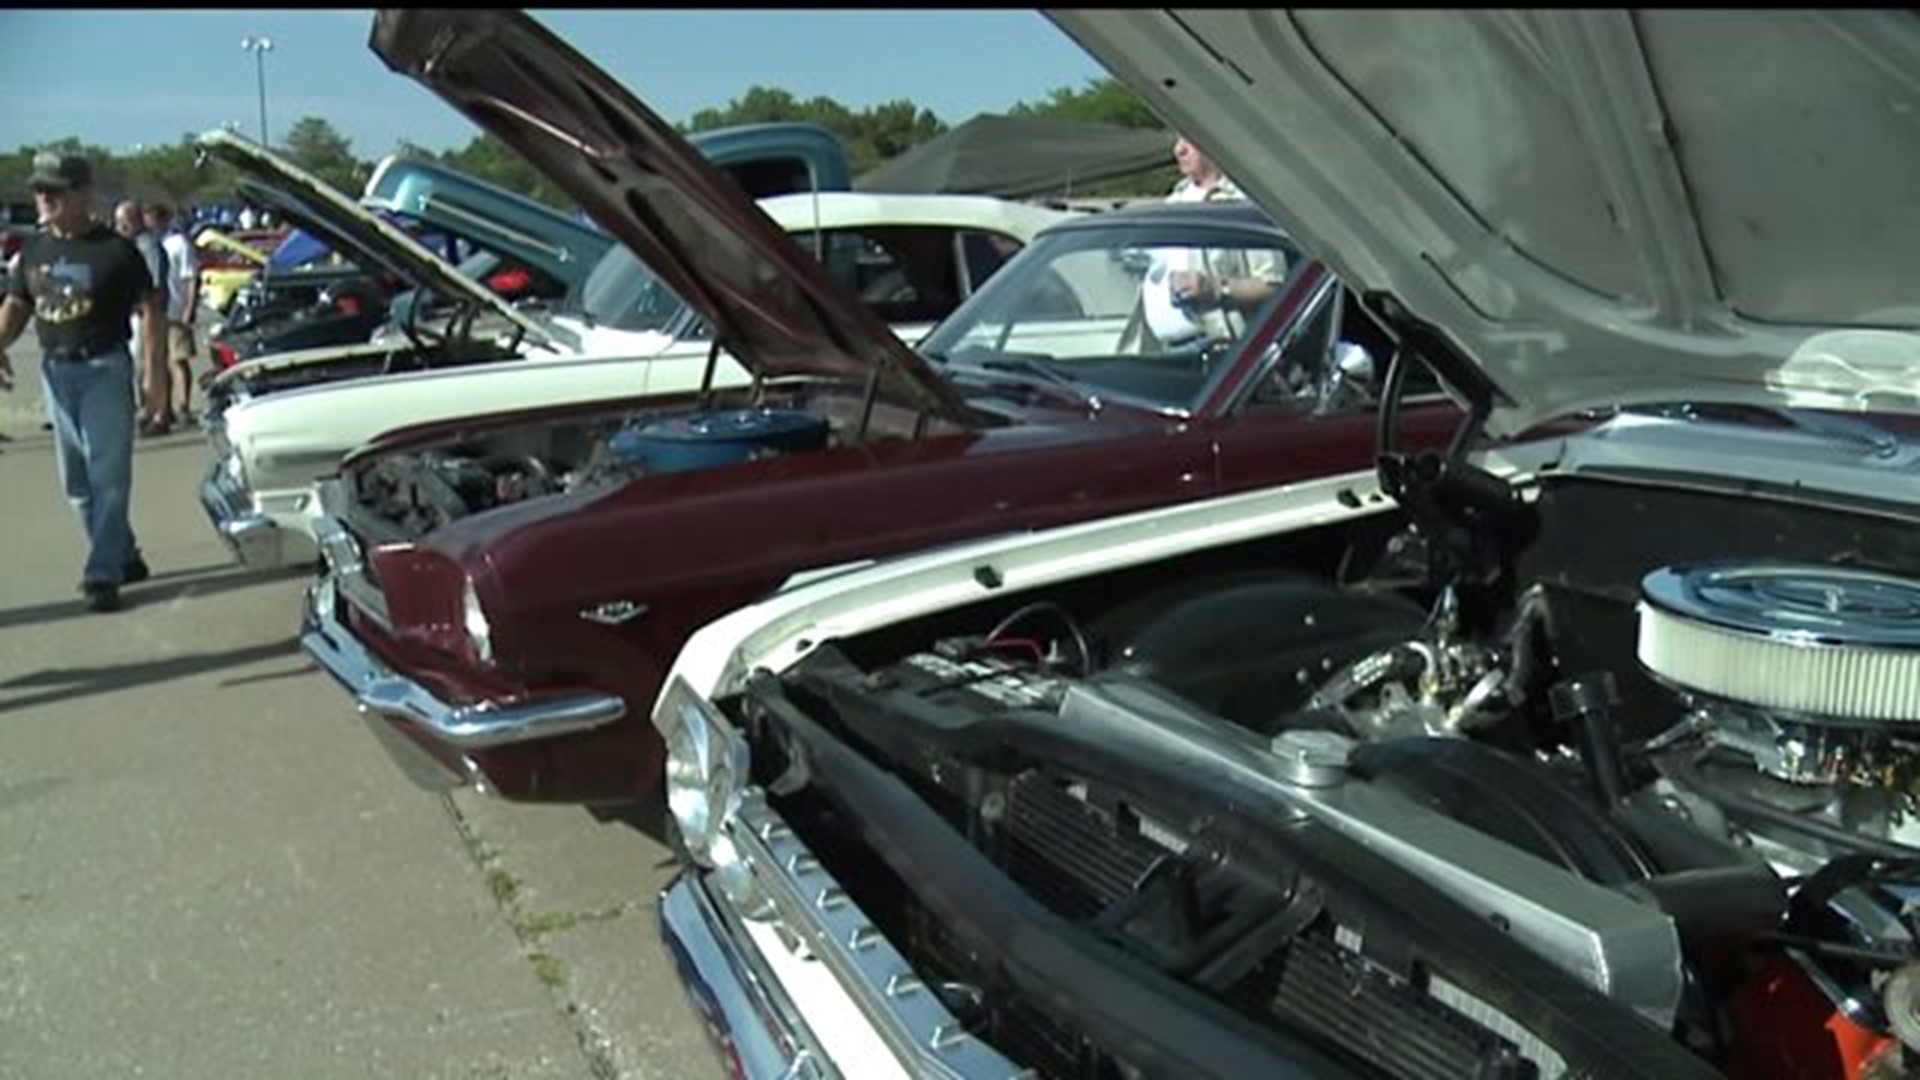 Second annual Classic Car Cruise held in Davenport